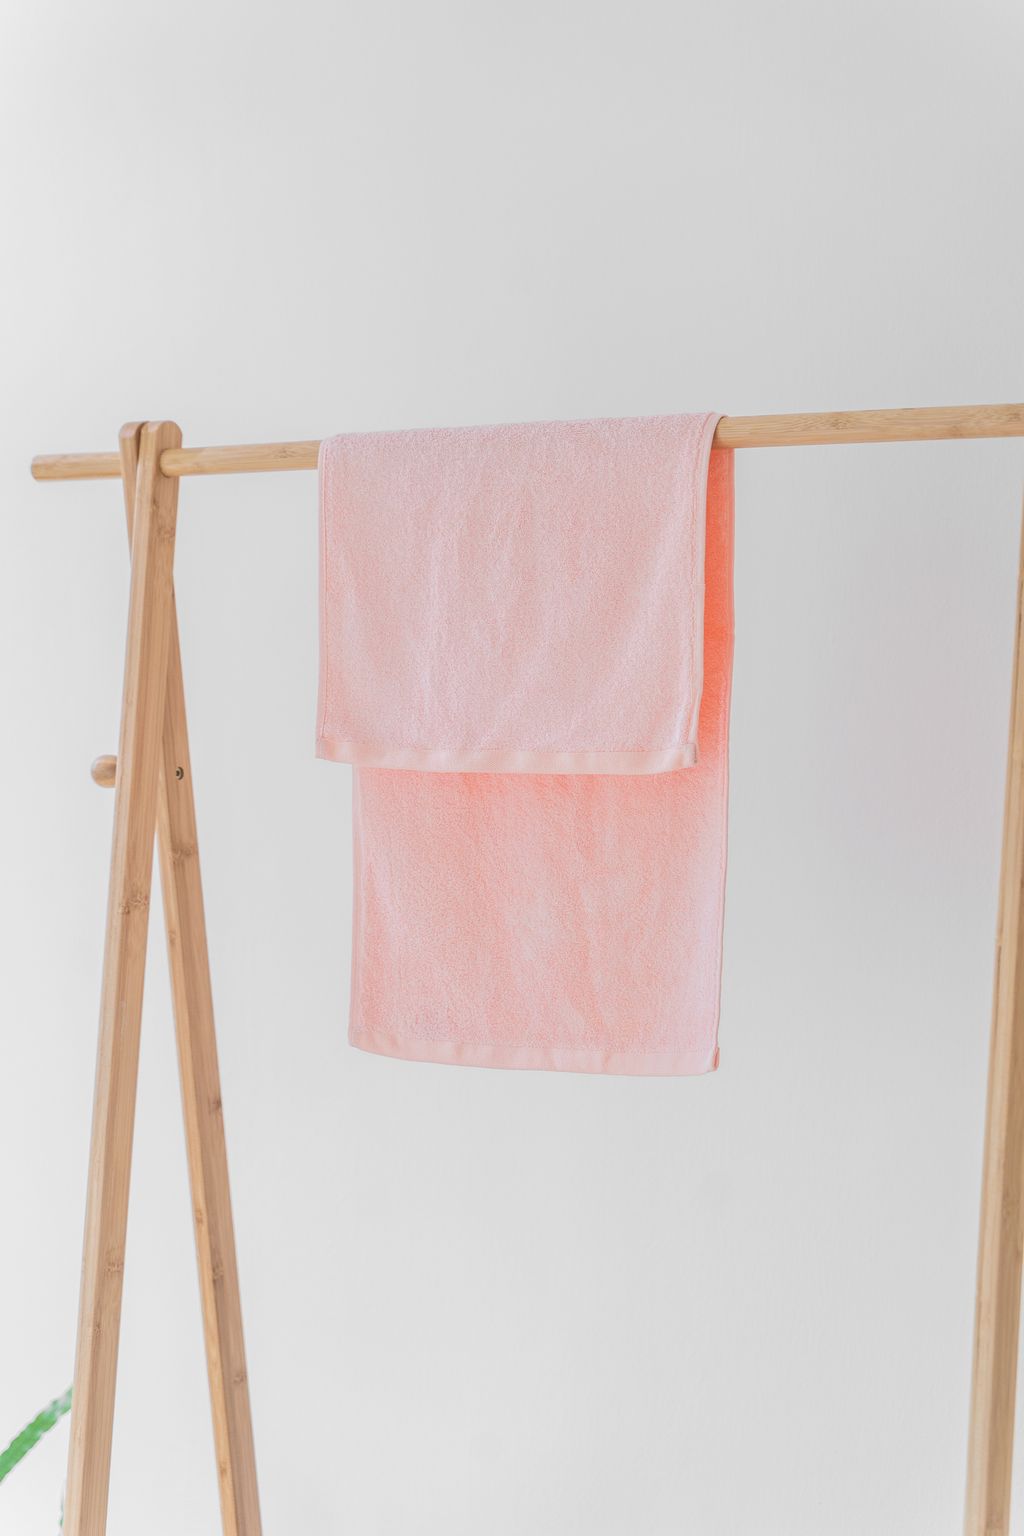 Bamboo Towel, Hand towel. Soft & Silky, Quick Drying